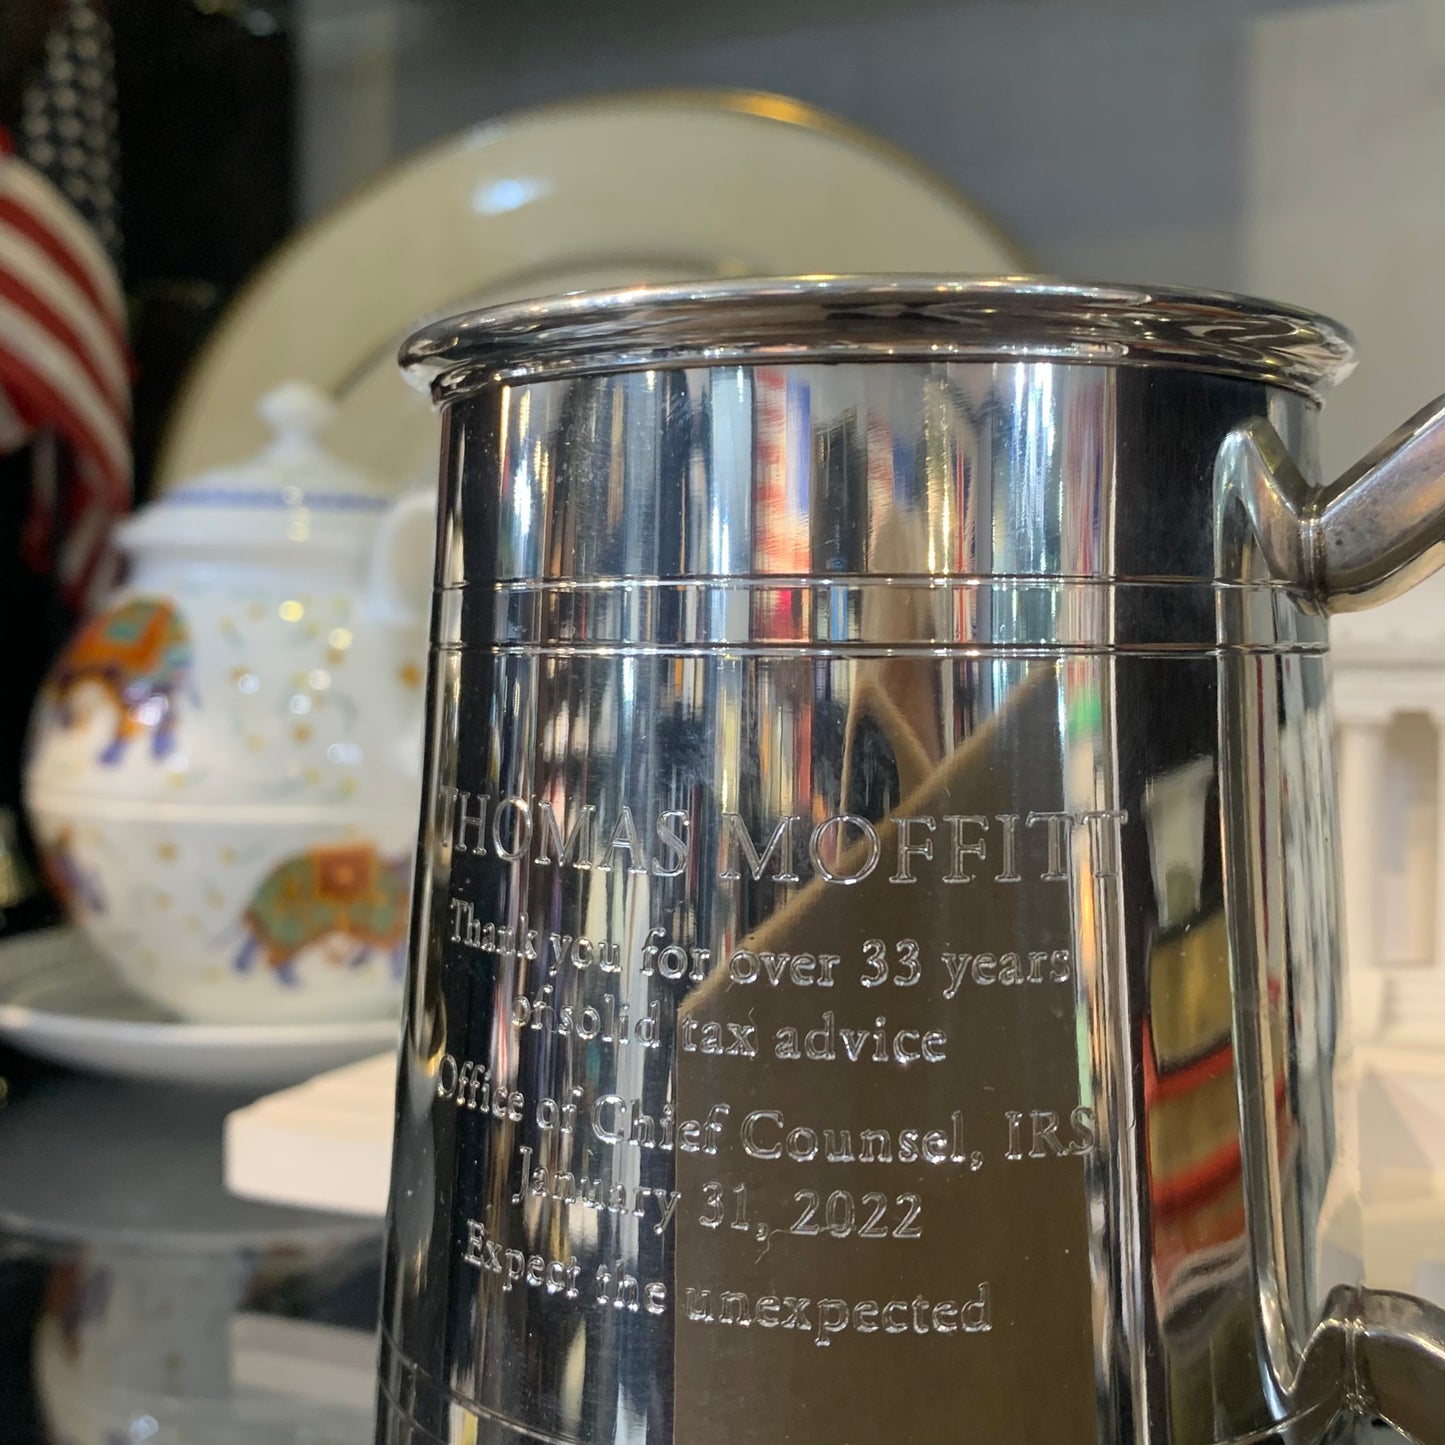 Award IRS Retirement | Hand Engraved Solid Pewter Tankard | Thomas Moffitt | 6 Lines of Hand Engraving | Patriotic Gift Wrap